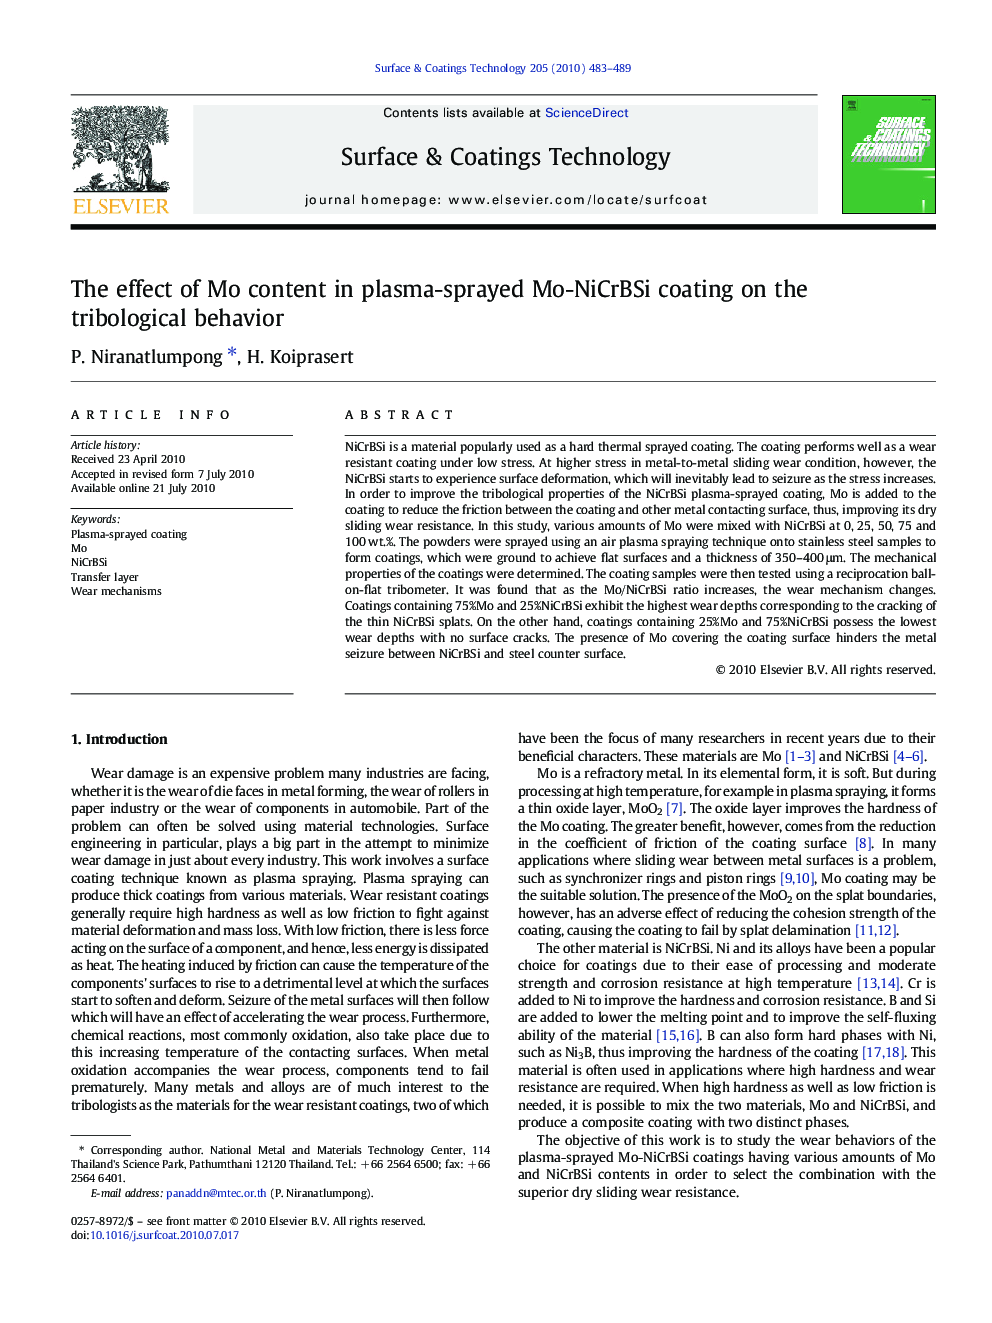 The effect of Mo content in plasma-sprayed Mo-NiCrBSi coating on the tribological behavior